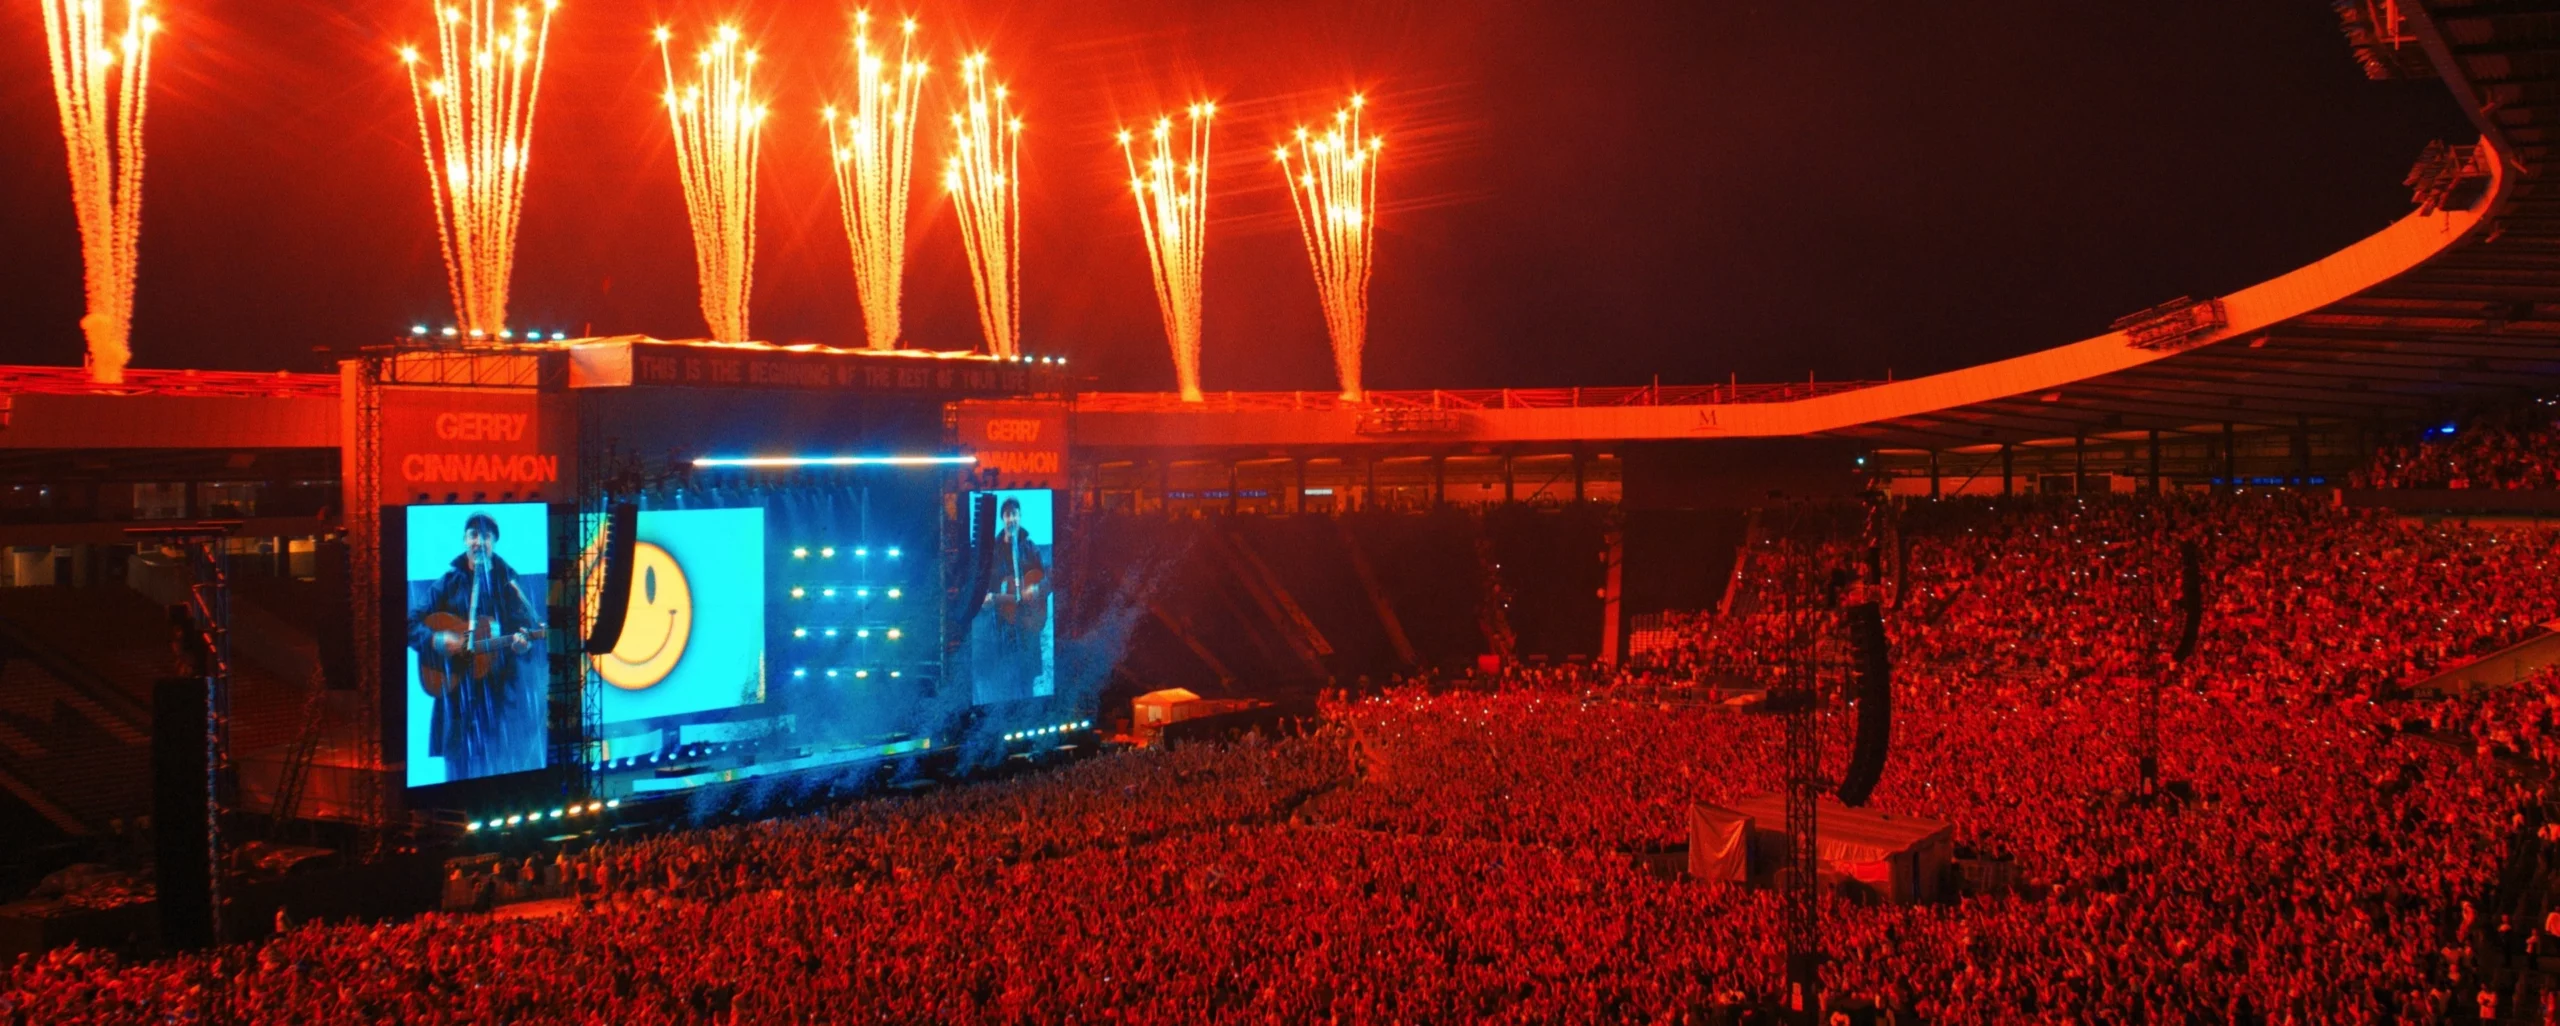 Film excerpt from Gerry CInnamon's incredible live show at Hampden Park as graded and edited by KINØ creative film production company.